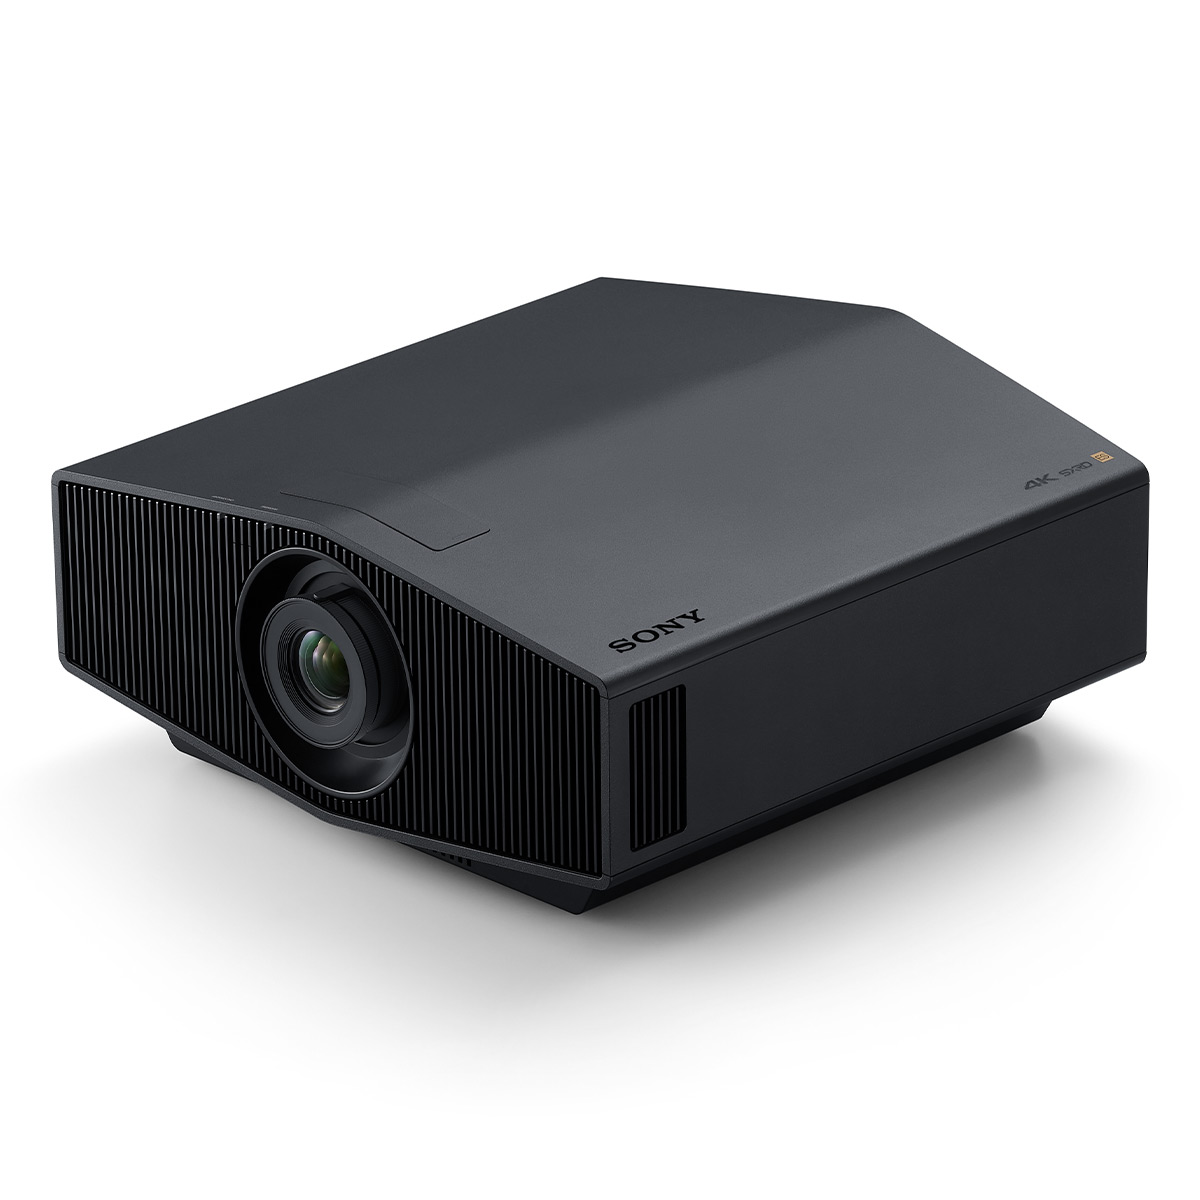 Sony VPL-XW5000ES 4K HDR Laser Home Theater Projector with Wide Dynamic Range Optics, 95% DCI-P3 Wide Color Gamut, & 2,000 Lumen Brightness (Black) - image 4 of 8